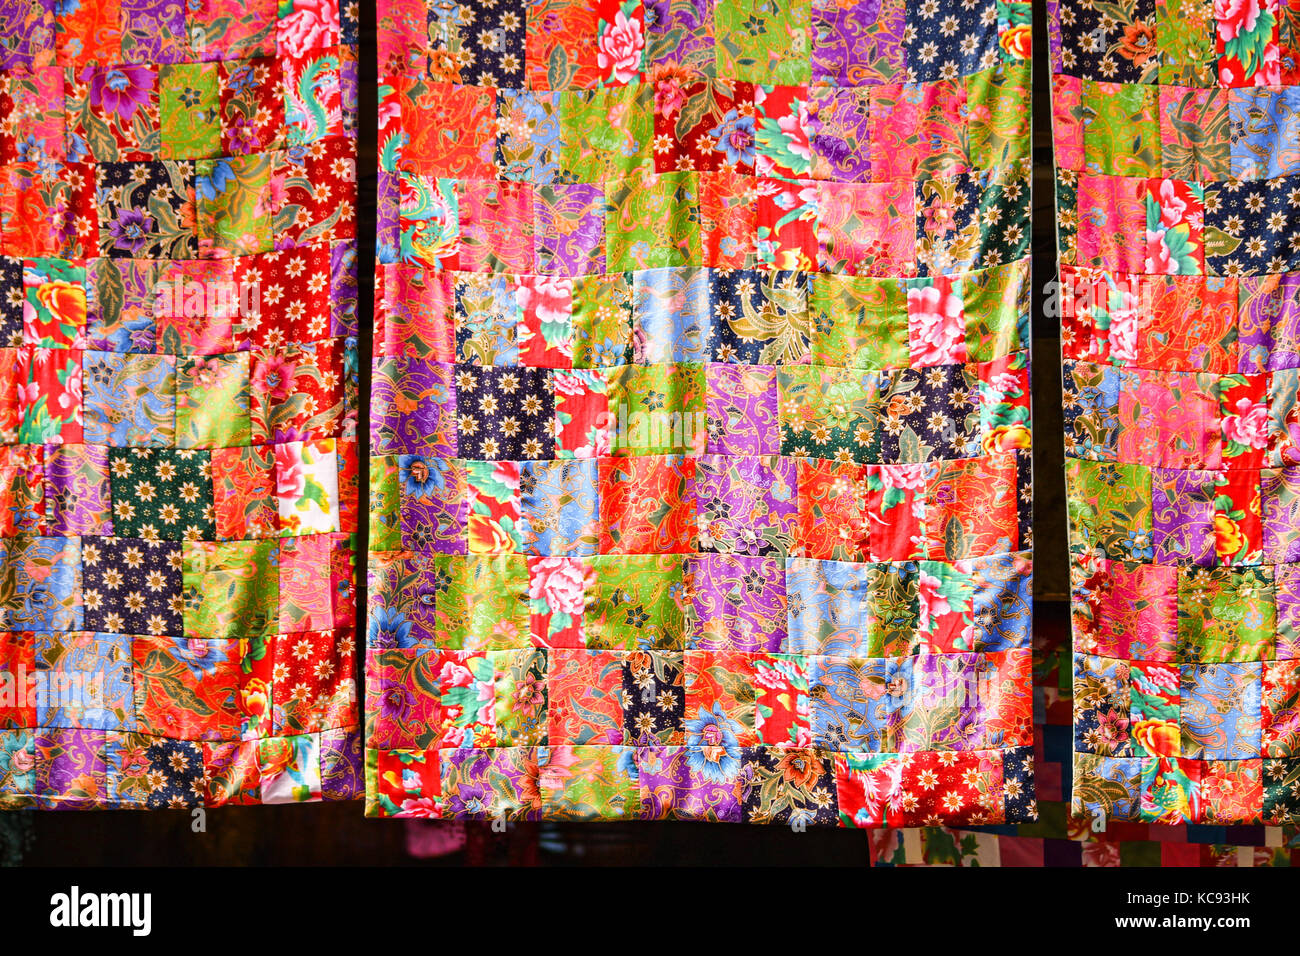 Malaysian Batik traditional cloth design that showcases Malaysian art, culture and tradition Stock Photo